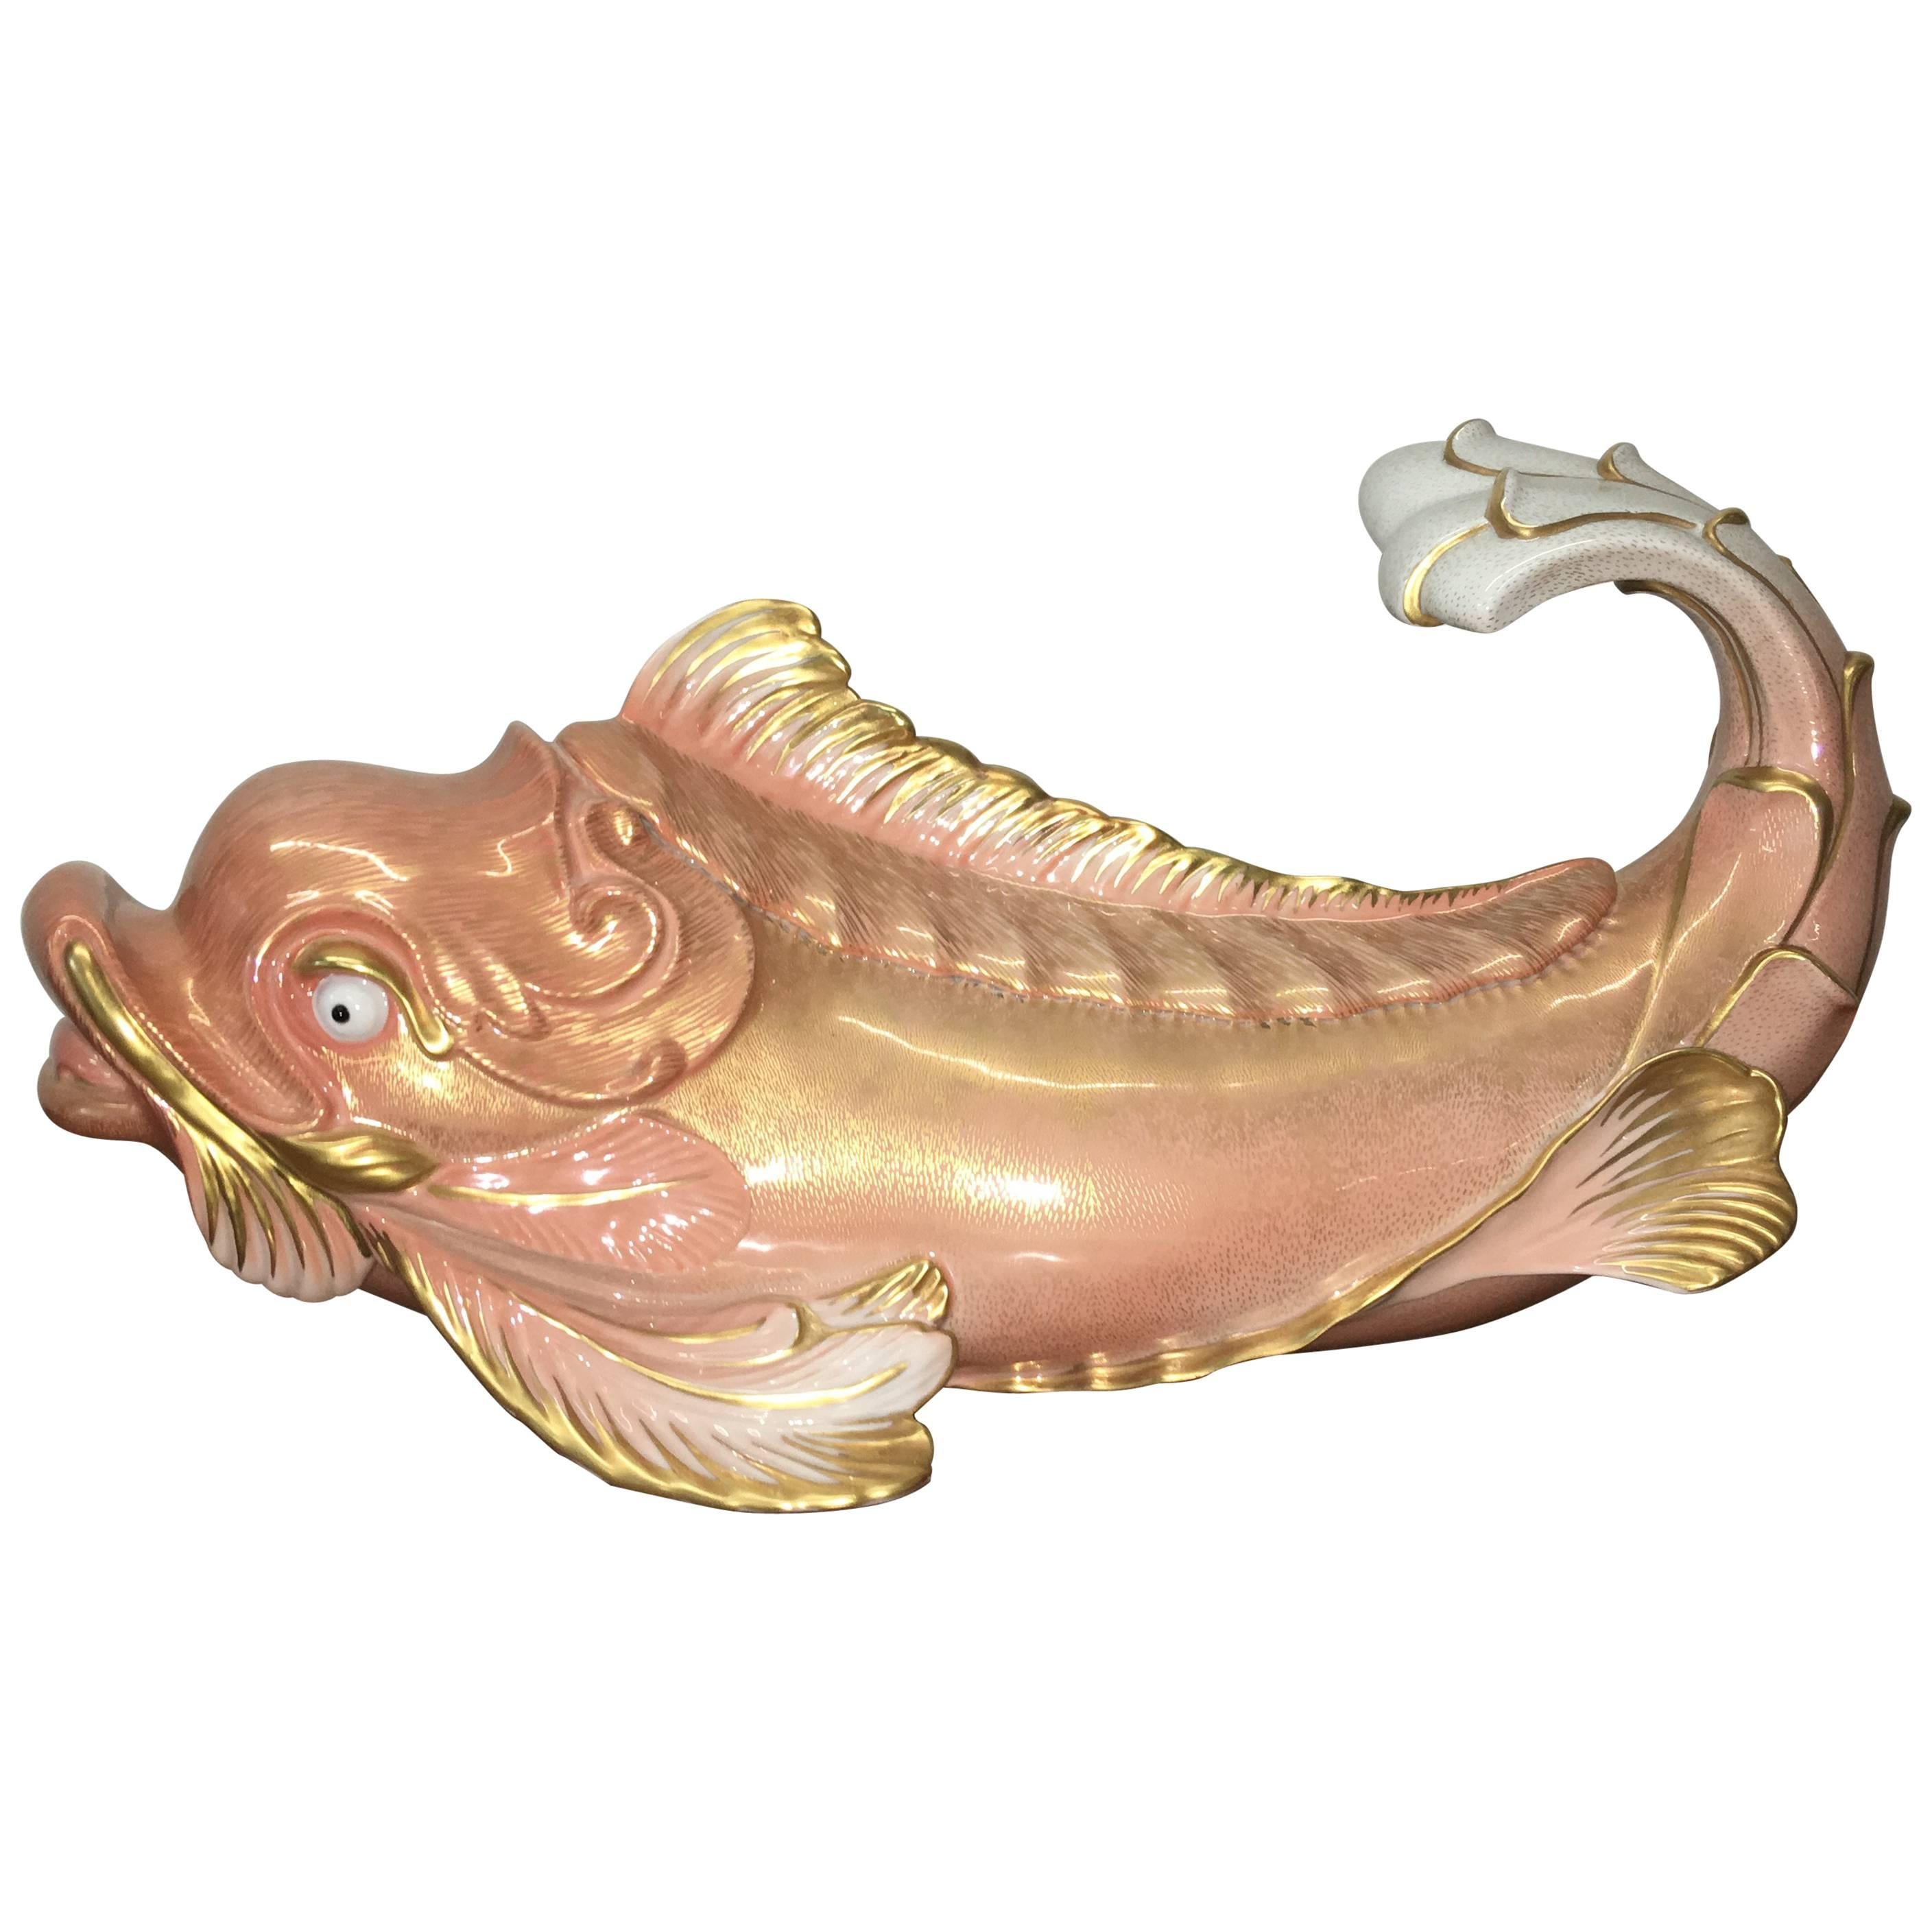 Giulia Mangani for Oggetti Italy Hand-Painted and Gilt Porcelain Dolphin